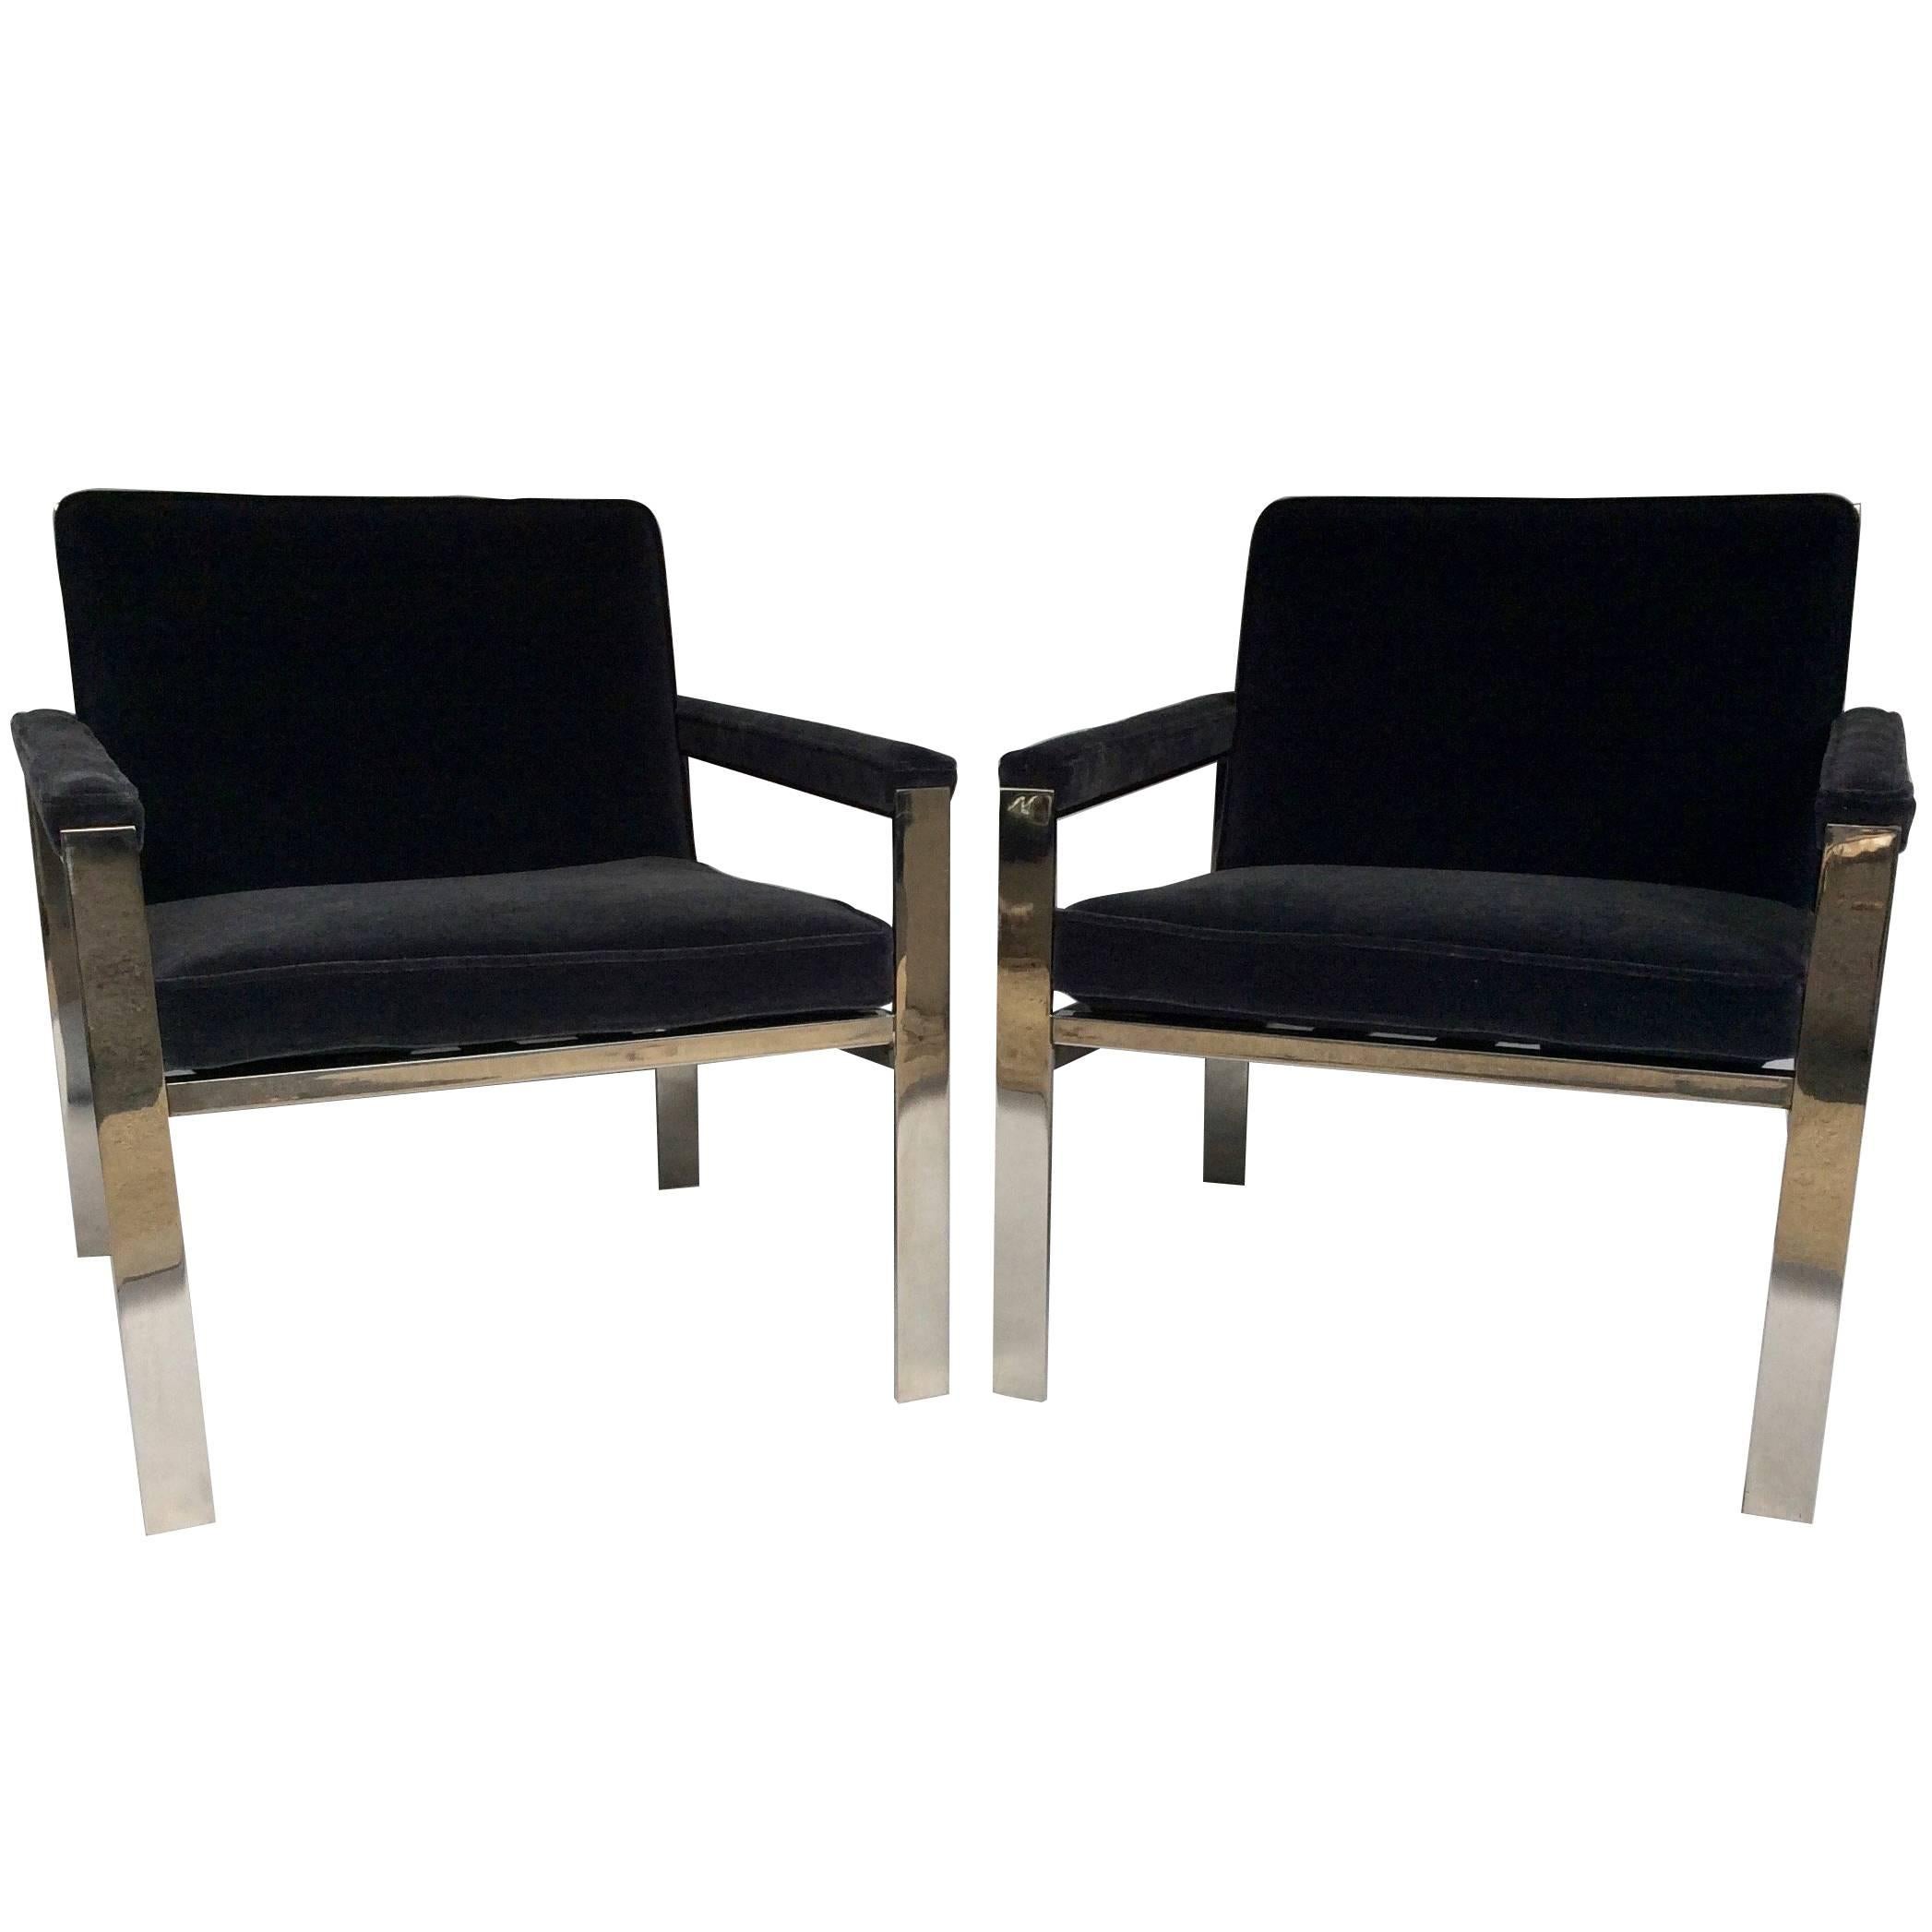 1970s Knoll/ Milo Baughman Pair of Chrome and Mohair Lounge Chairs For Sale